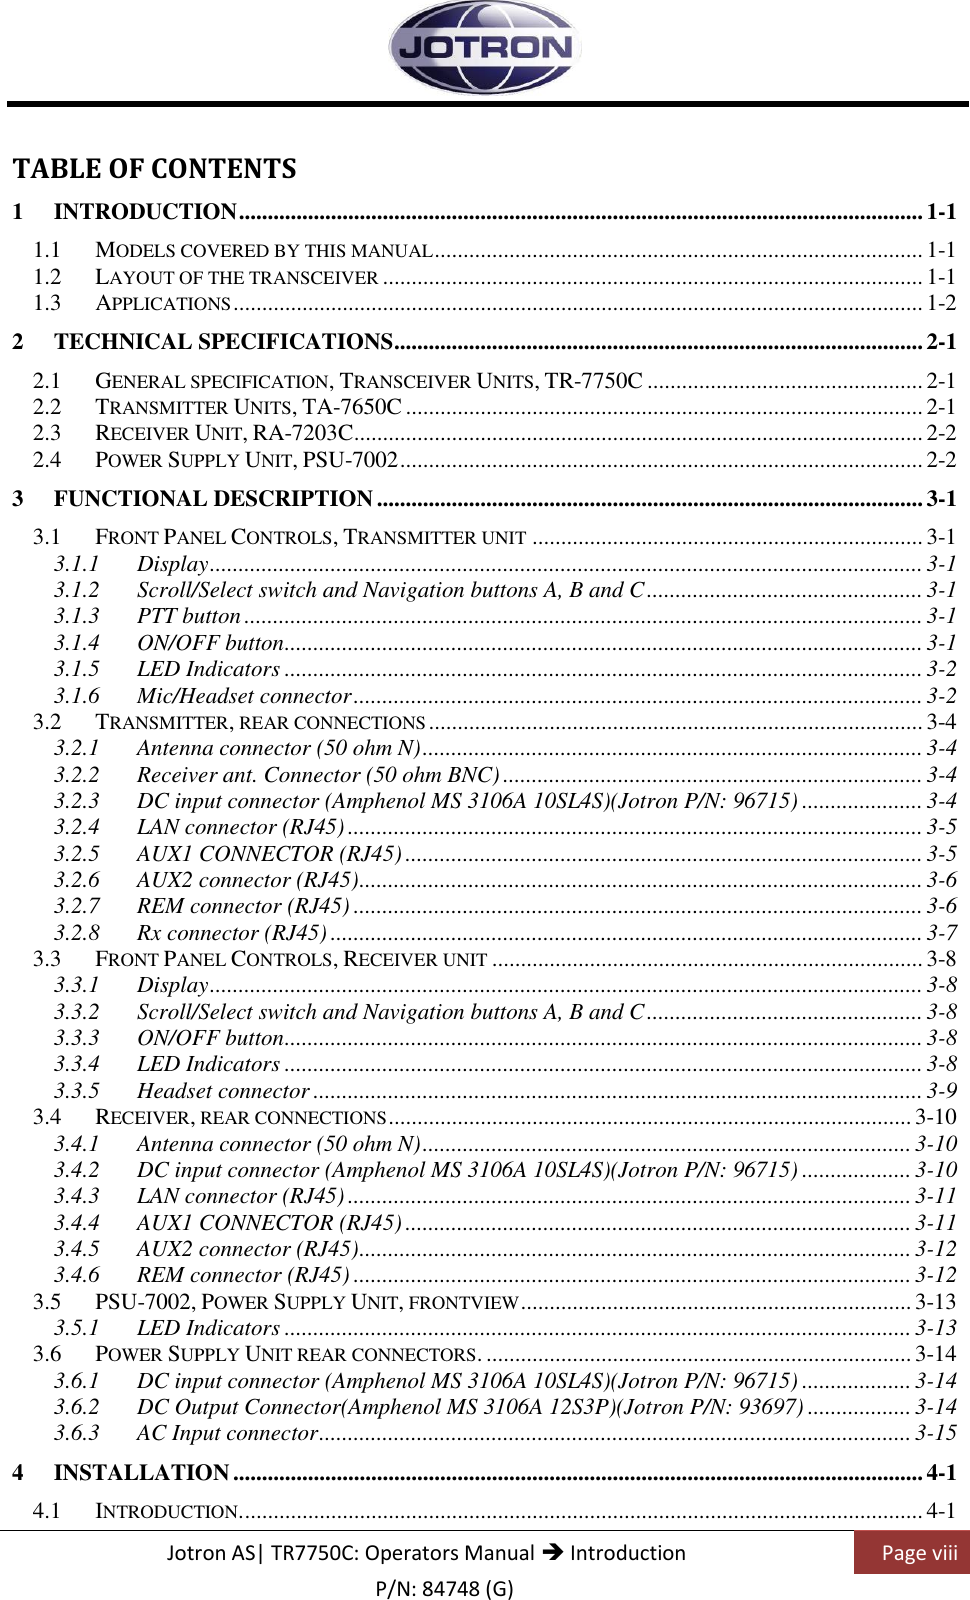    Jotron AS| TR7750C: Operators Manual  Introduction Page viii    P/N: 84748 (G) TABLE OF CONTENTS 1 INTRODUCTION ....................................................................................................................... 1-1 1.1 MODELS COVERED BY THIS MANUAL ..................................................................................... 1-1 1.2 LAYOUT OF THE TRANSCEIVER .............................................................................................. 1-1 1.3 APPLICATIONS ........................................................................................................................ 1-2 2 TECHNICAL SPECIFICATIONS ............................................................................................ 2-1 2.1 GENERAL SPECIFICATION, TRANSCEIVER UNITS, TR-7750C ................................................ 2-1 2.2 TRANSMITTER UNITS, TA-7650C .......................................................................................... 2-1 2.3 RECEIVER UNIT, RA-7203C ................................................................................................... 2-2 2.4 POWER SUPPLY UNIT, PSU-7002 ........................................................................................... 2-2 3 FUNCTIONAL DESCRIPTION ............................................................................................... 3-1 3.1 FRONT PANEL CONTROLS, TRANSMITTER UNIT .................................................................... 3-1 3.1.1 Display ............................................................................................................................ 3-1 3.1.2 Scroll/Select switch and Navigation buttons A, B and C ................................................ 3-1 3.1.3 PTT button ...................................................................................................................... 3-1 3.1.4 ON/OFF button ............................................................................................................... 3-1 3.1.5 LED Indicators ............................................................................................................... 3-2 3.1.6 Mic/Headset connector ................................................................................................... 3-2 3.2 TRANSMITTER, REAR CONNECTIONS ...................................................................................... 3-4 3.2.1 Antenna connector (50 ohm N) ....................................................................................... 3-4 3.2.2 Receiver ant. Connector (50 ohm BNC) ......................................................................... 3-4 3.2.3 DC input connector (Amphenol MS 3106A 10SL4S)(Jotron P/N: 96715) ..................... 3-4 3.2.4 LAN connector (RJ45) .................................................................................................... 3-5 3.2.5 AUX1 CONNECTOR (RJ45) .......................................................................................... 3-5 3.2.6 AUX2 connector (RJ45) .................................................................................................. 3-6 3.2.7 REM connector (RJ45) ................................................................................................... 3-6 3.2.8 Rx connector (RJ45) ....................................................................................................... 3-7 3.3 FRONT PANEL CONTROLS, RECEIVER UNIT ........................................................................... 3-8 3.3.1 Display ............................................................................................................................ 3-8 3.3.2 Scroll/Select switch and Navigation buttons A, B and C ................................................ 3-8 3.3.3 ON/OFF button ............................................................................................................... 3-8 3.3.4 LED Indicators ............................................................................................................... 3-8 3.3.5 Headset connector .......................................................................................................... 3-9 3.4 RECEIVER, REAR CONNECTIONS ........................................................................................... 3-10 3.4.1 Antenna connector (50 ohm N) ..................................................................................... 3-10 3.4.2 DC input connector (Amphenol MS 3106A 10SL4S)(Jotron P/N: 96715) ................... 3-10 3.4.3 LAN connector (RJ45) .................................................................................................. 3-11 3.4.4 AUX1 CONNECTOR (RJ45) ........................................................................................ 3-11 3.4.5 AUX2 connector (RJ45) ................................................................................................ 3-12 3.4.6 REM connector (RJ45) ................................................................................................. 3-12 3.5 PSU-7002, POWER SUPPLY UNIT, FRONTVIEW .................................................................... 3-13 3.5.1 LED Indicators ............................................................................................................. 3-13 3.6 POWER SUPPLY UNIT REAR CONNECTORS. .......................................................................... 3-14 3.6.1 DC input connector (Amphenol MS 3106A 10SL4S)(Jotron P/N: 96715) ................... 3-14 3.6.2 DC Output Connector(Amphenol MS 3106A 12S3P)(Jotron P/N: 93697) .................. 3-14 3.6.3 AC Input connector ....................................................................................................... 3-15 4 INSTALLATION ........................................................................................................................ 4-1 4.1 INTRODUCTION. ...................................................................................................................... 4-1 